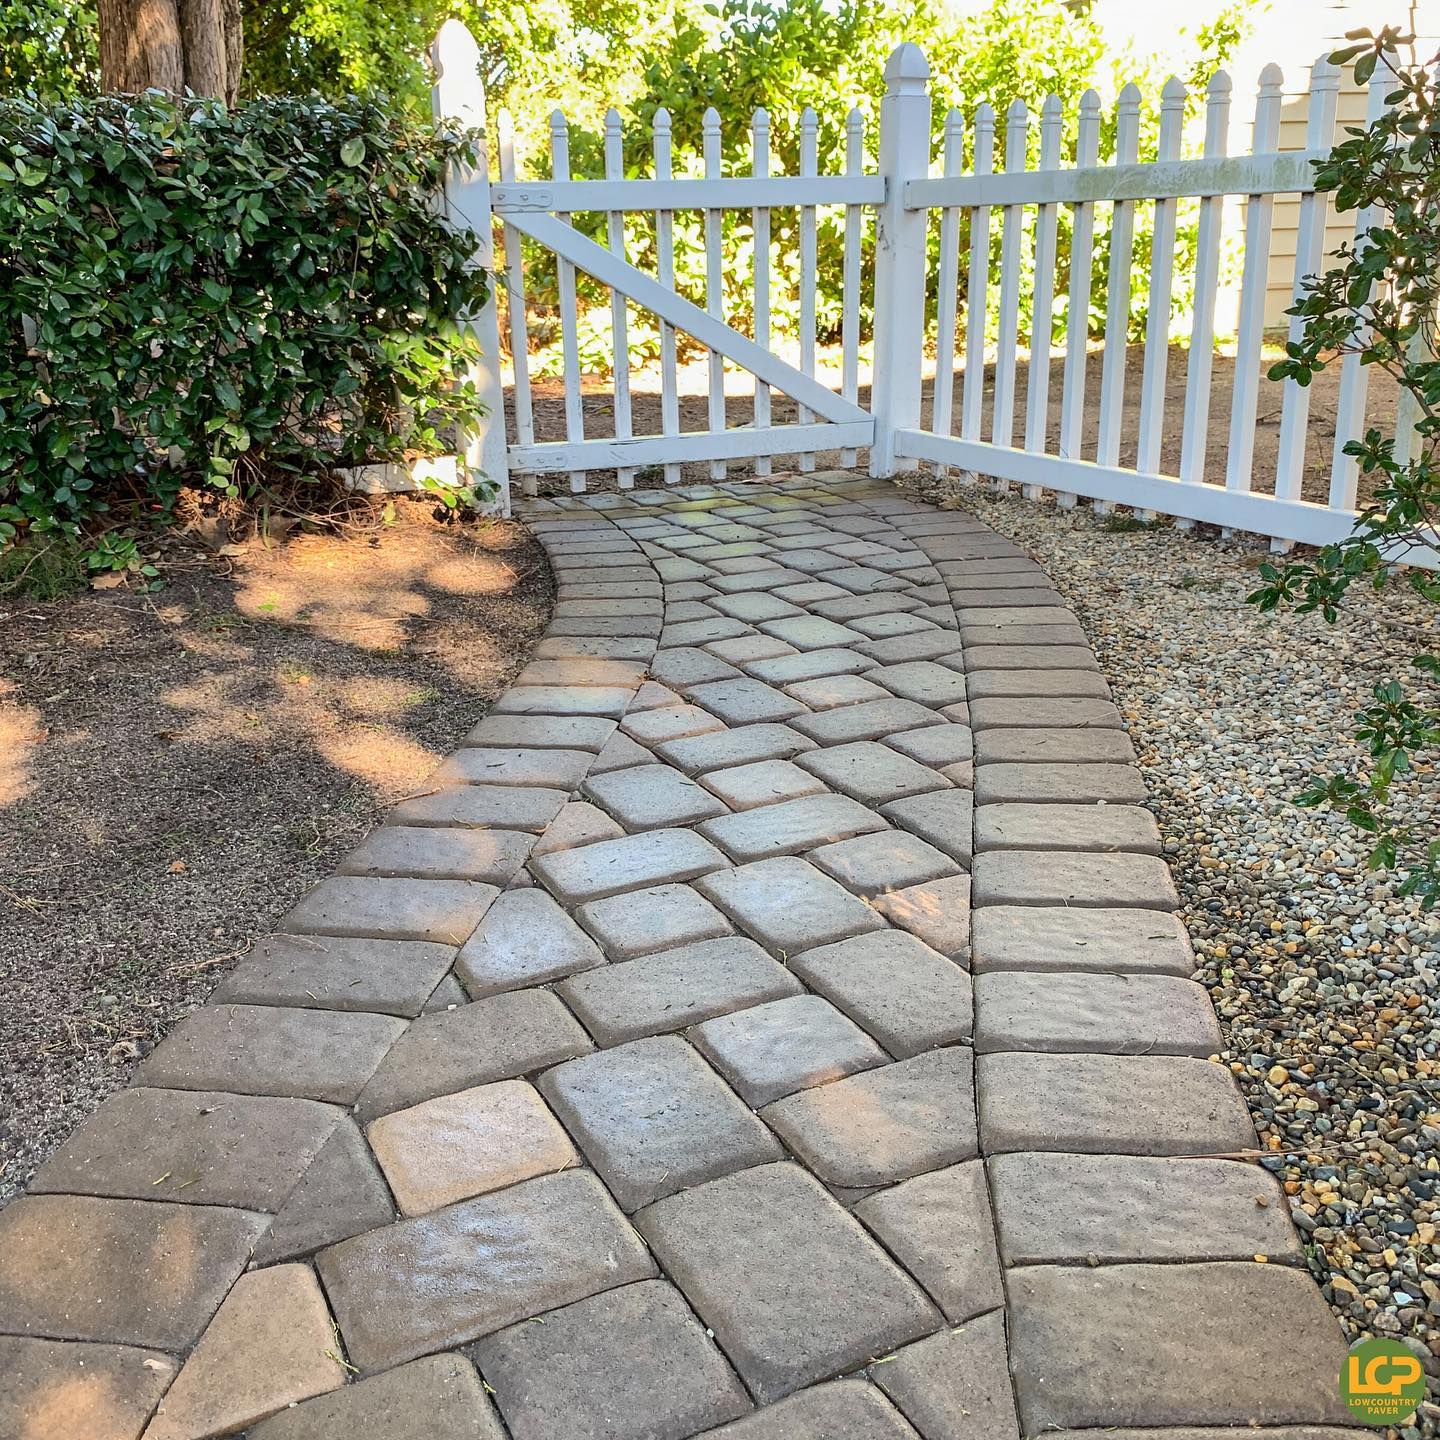 Paver walkway. Photo by @lowcountry_paver